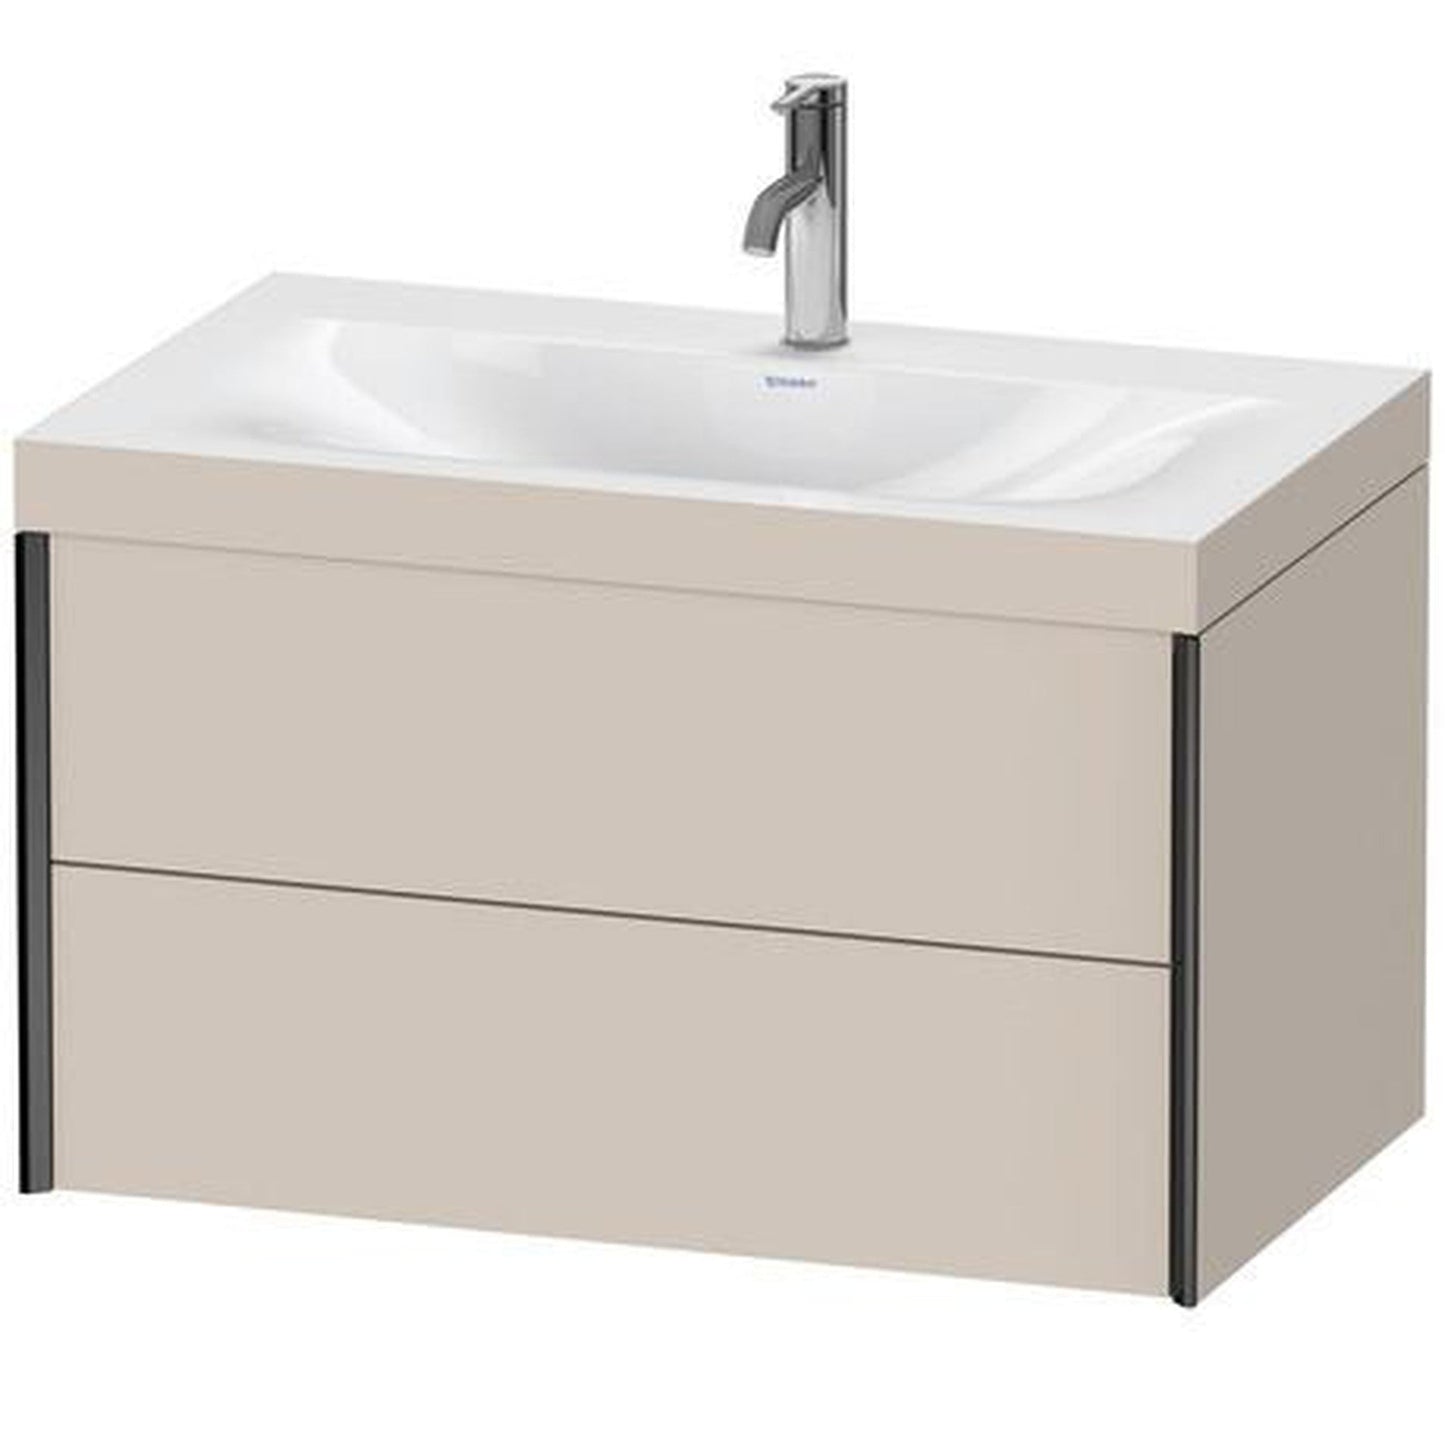 Duravit Xviu 31" x 20" x 19" Two Drawer C-Bonded Wall-Mount Vanity Kit With One Tap Hole, Taupe (XV4615OB291C)